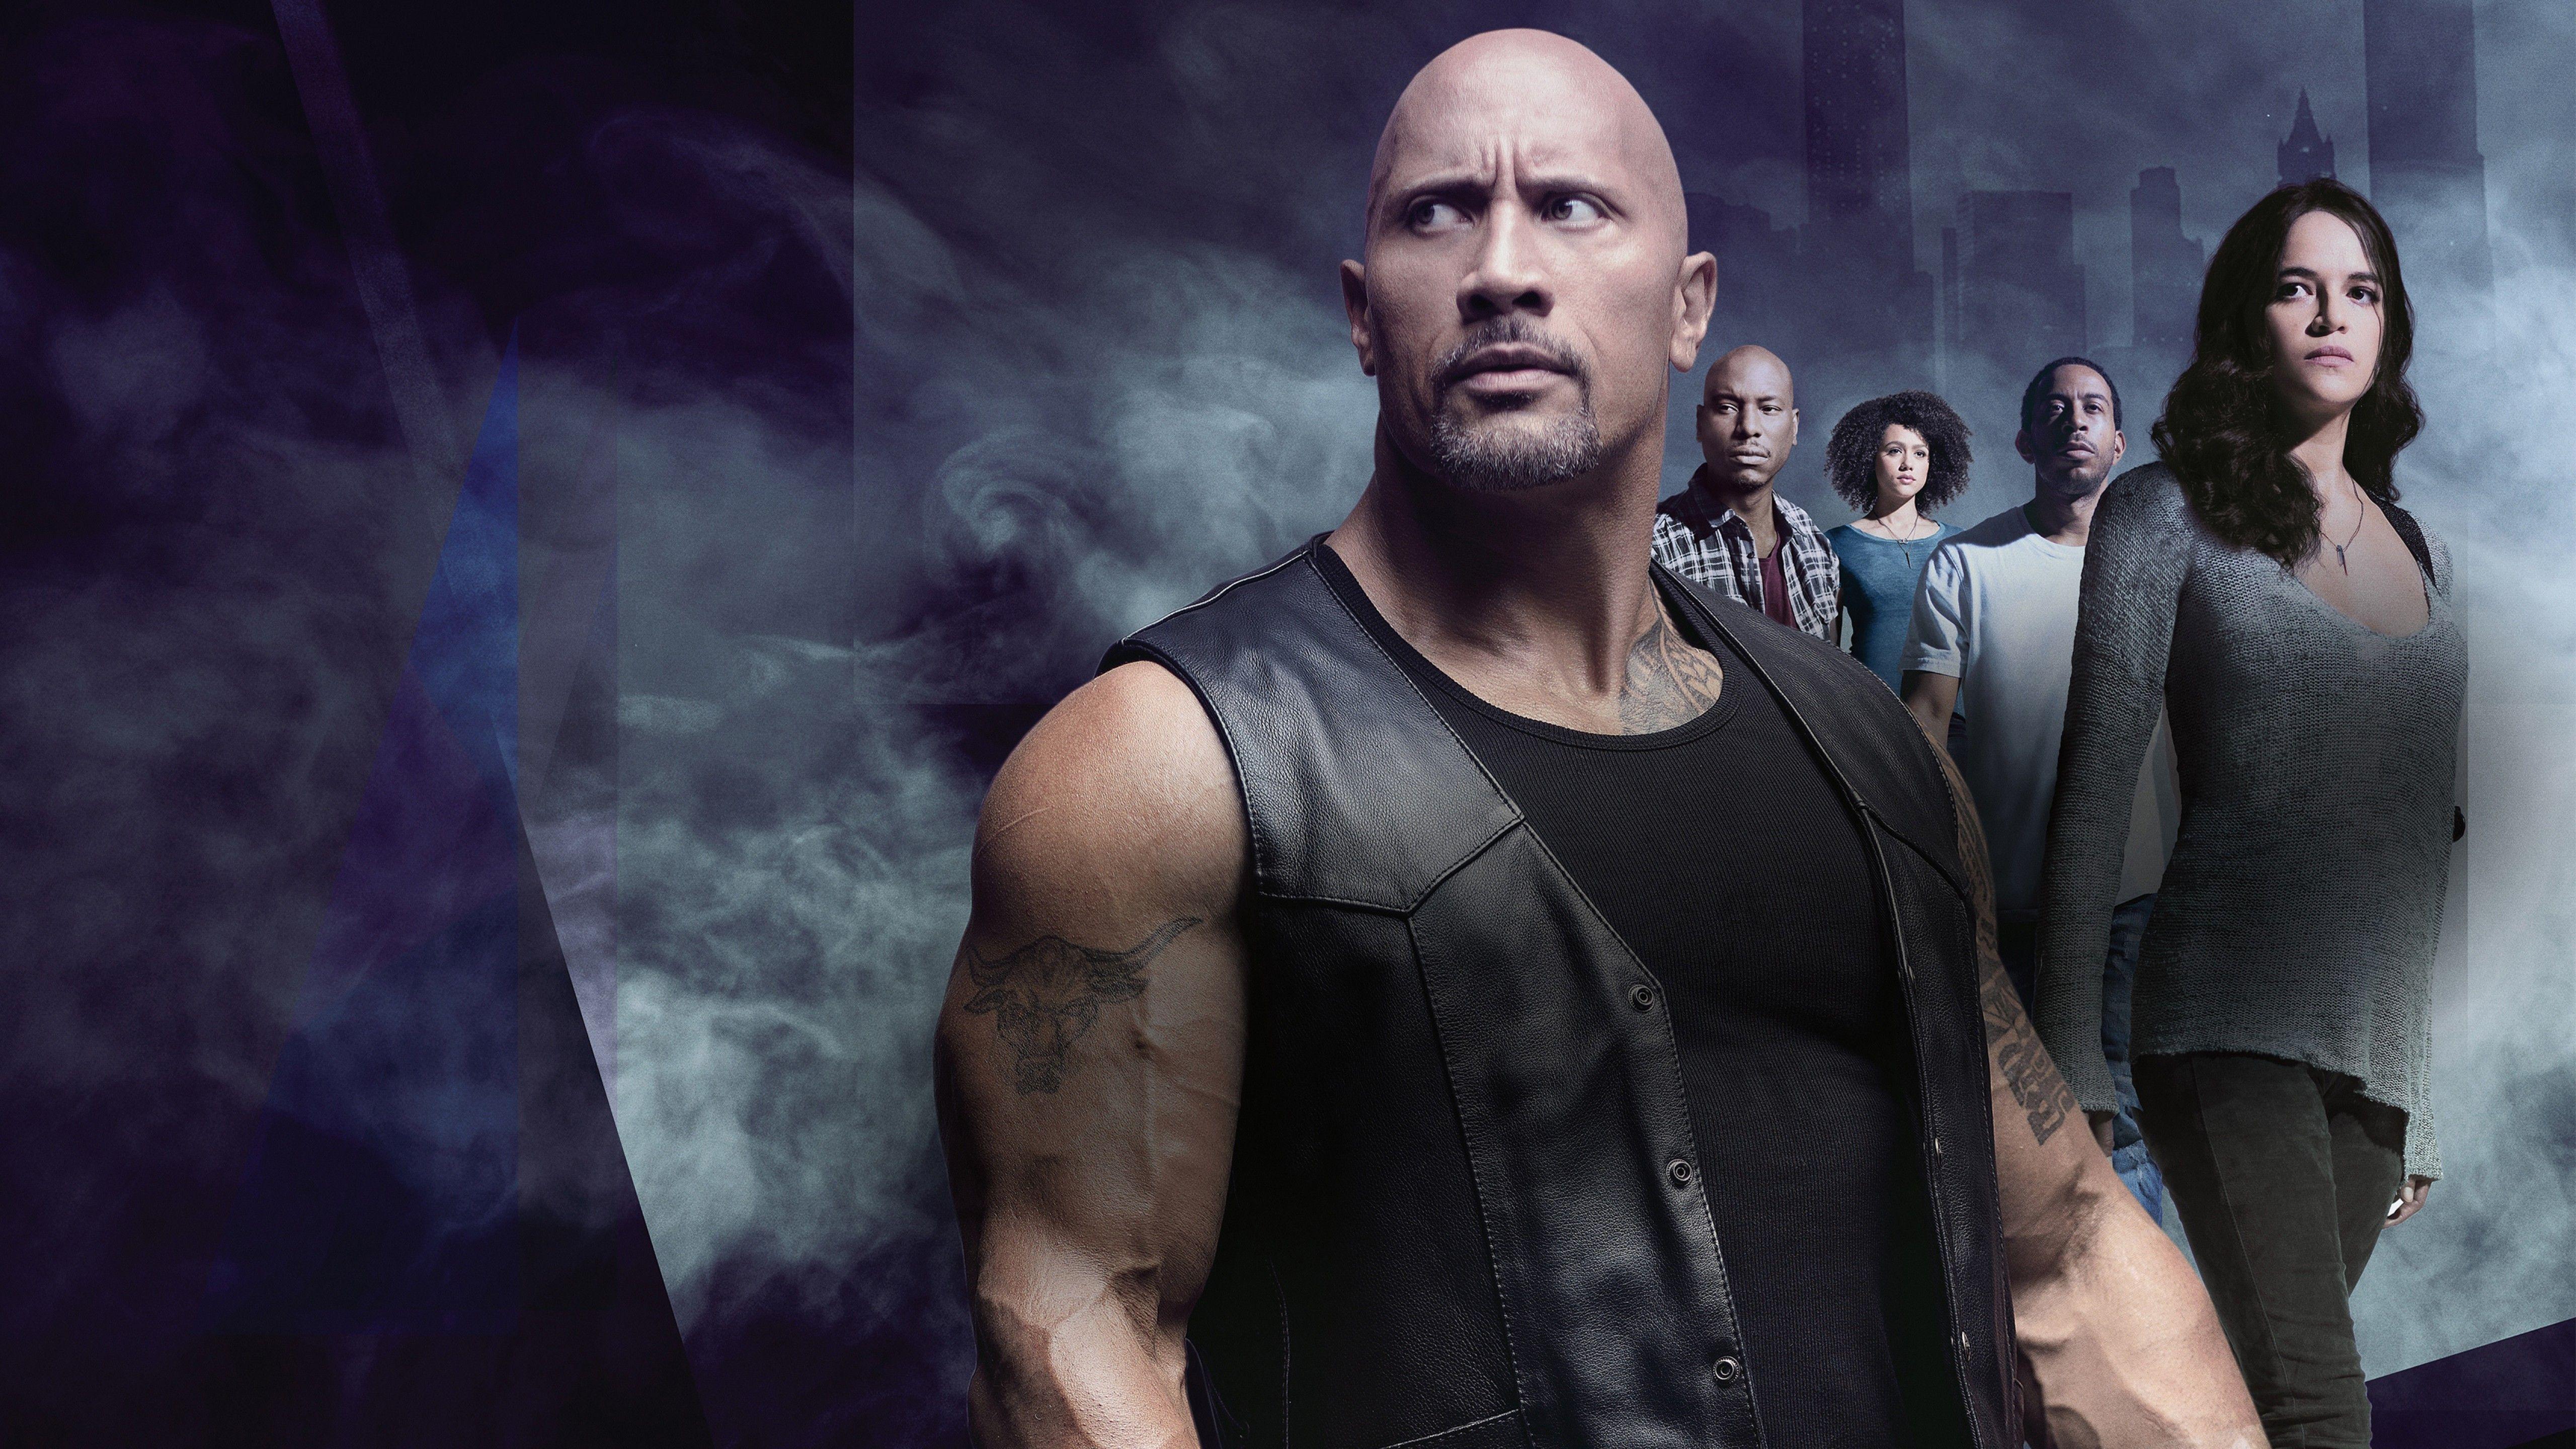 Download 12 The Fate of the Furious Wallpaper